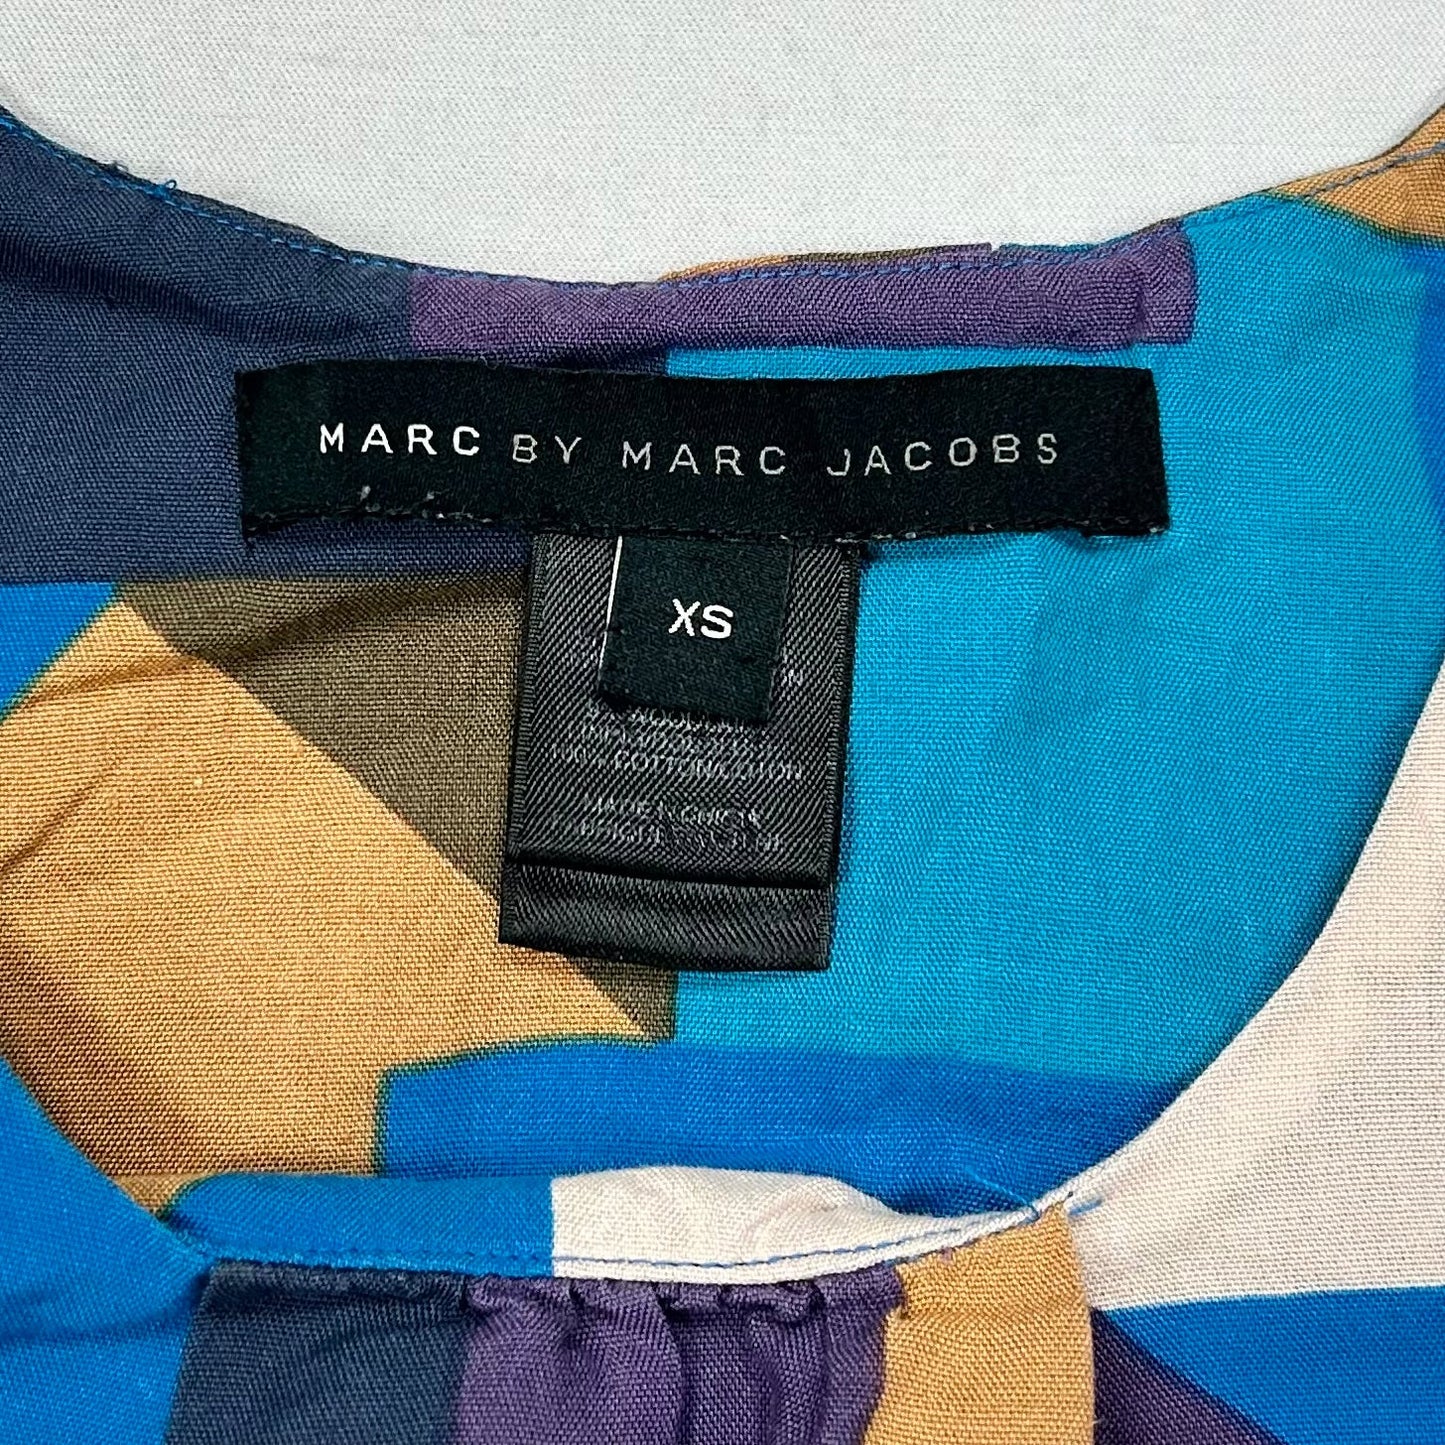 Blue & Tan Dress Designer By Marc By Marc Jacobs, Size: Xs